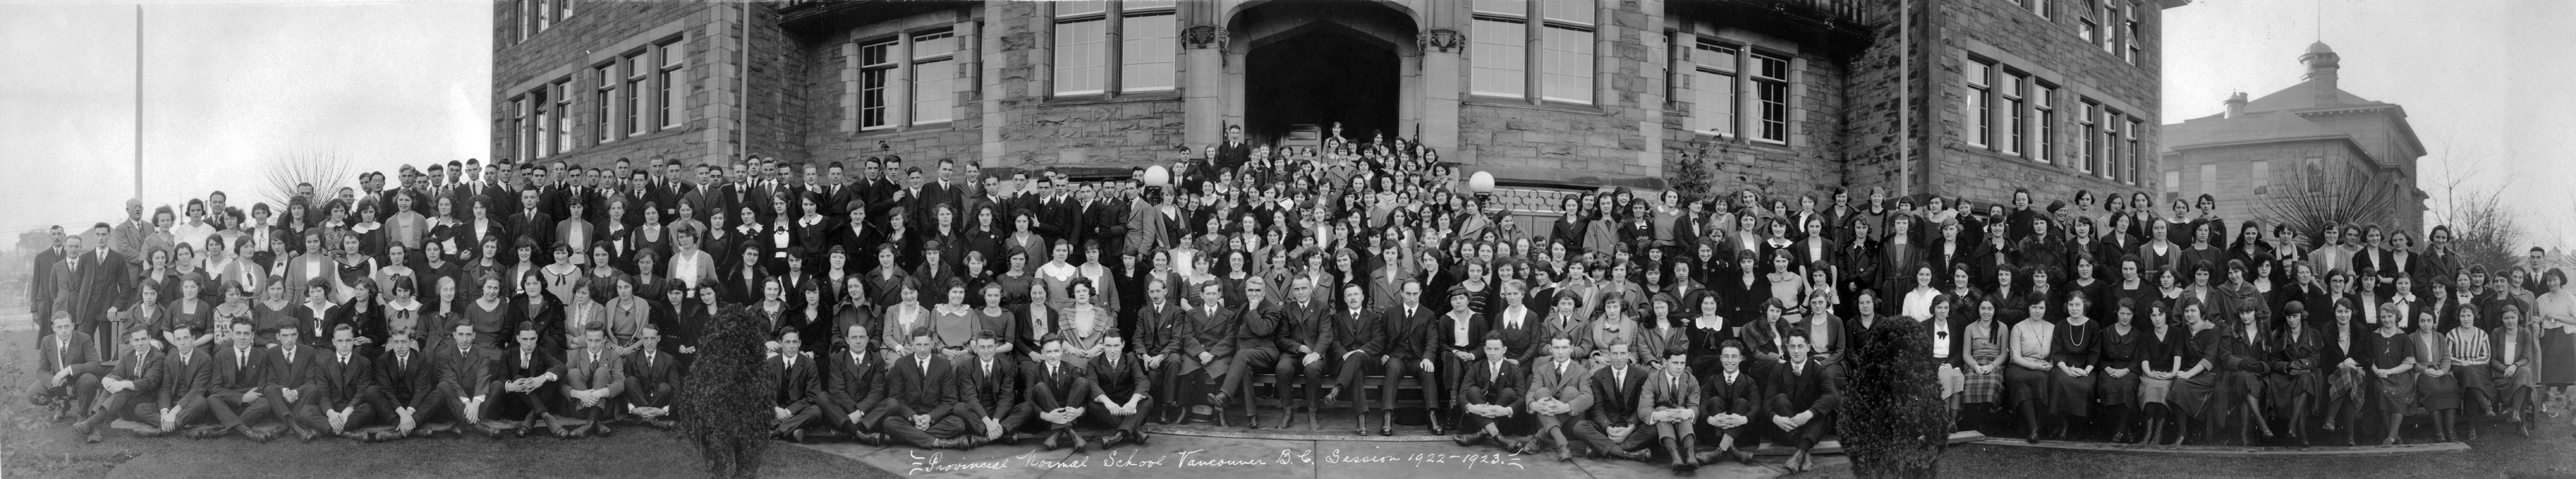 normal-school-teachjers-and-students-1923